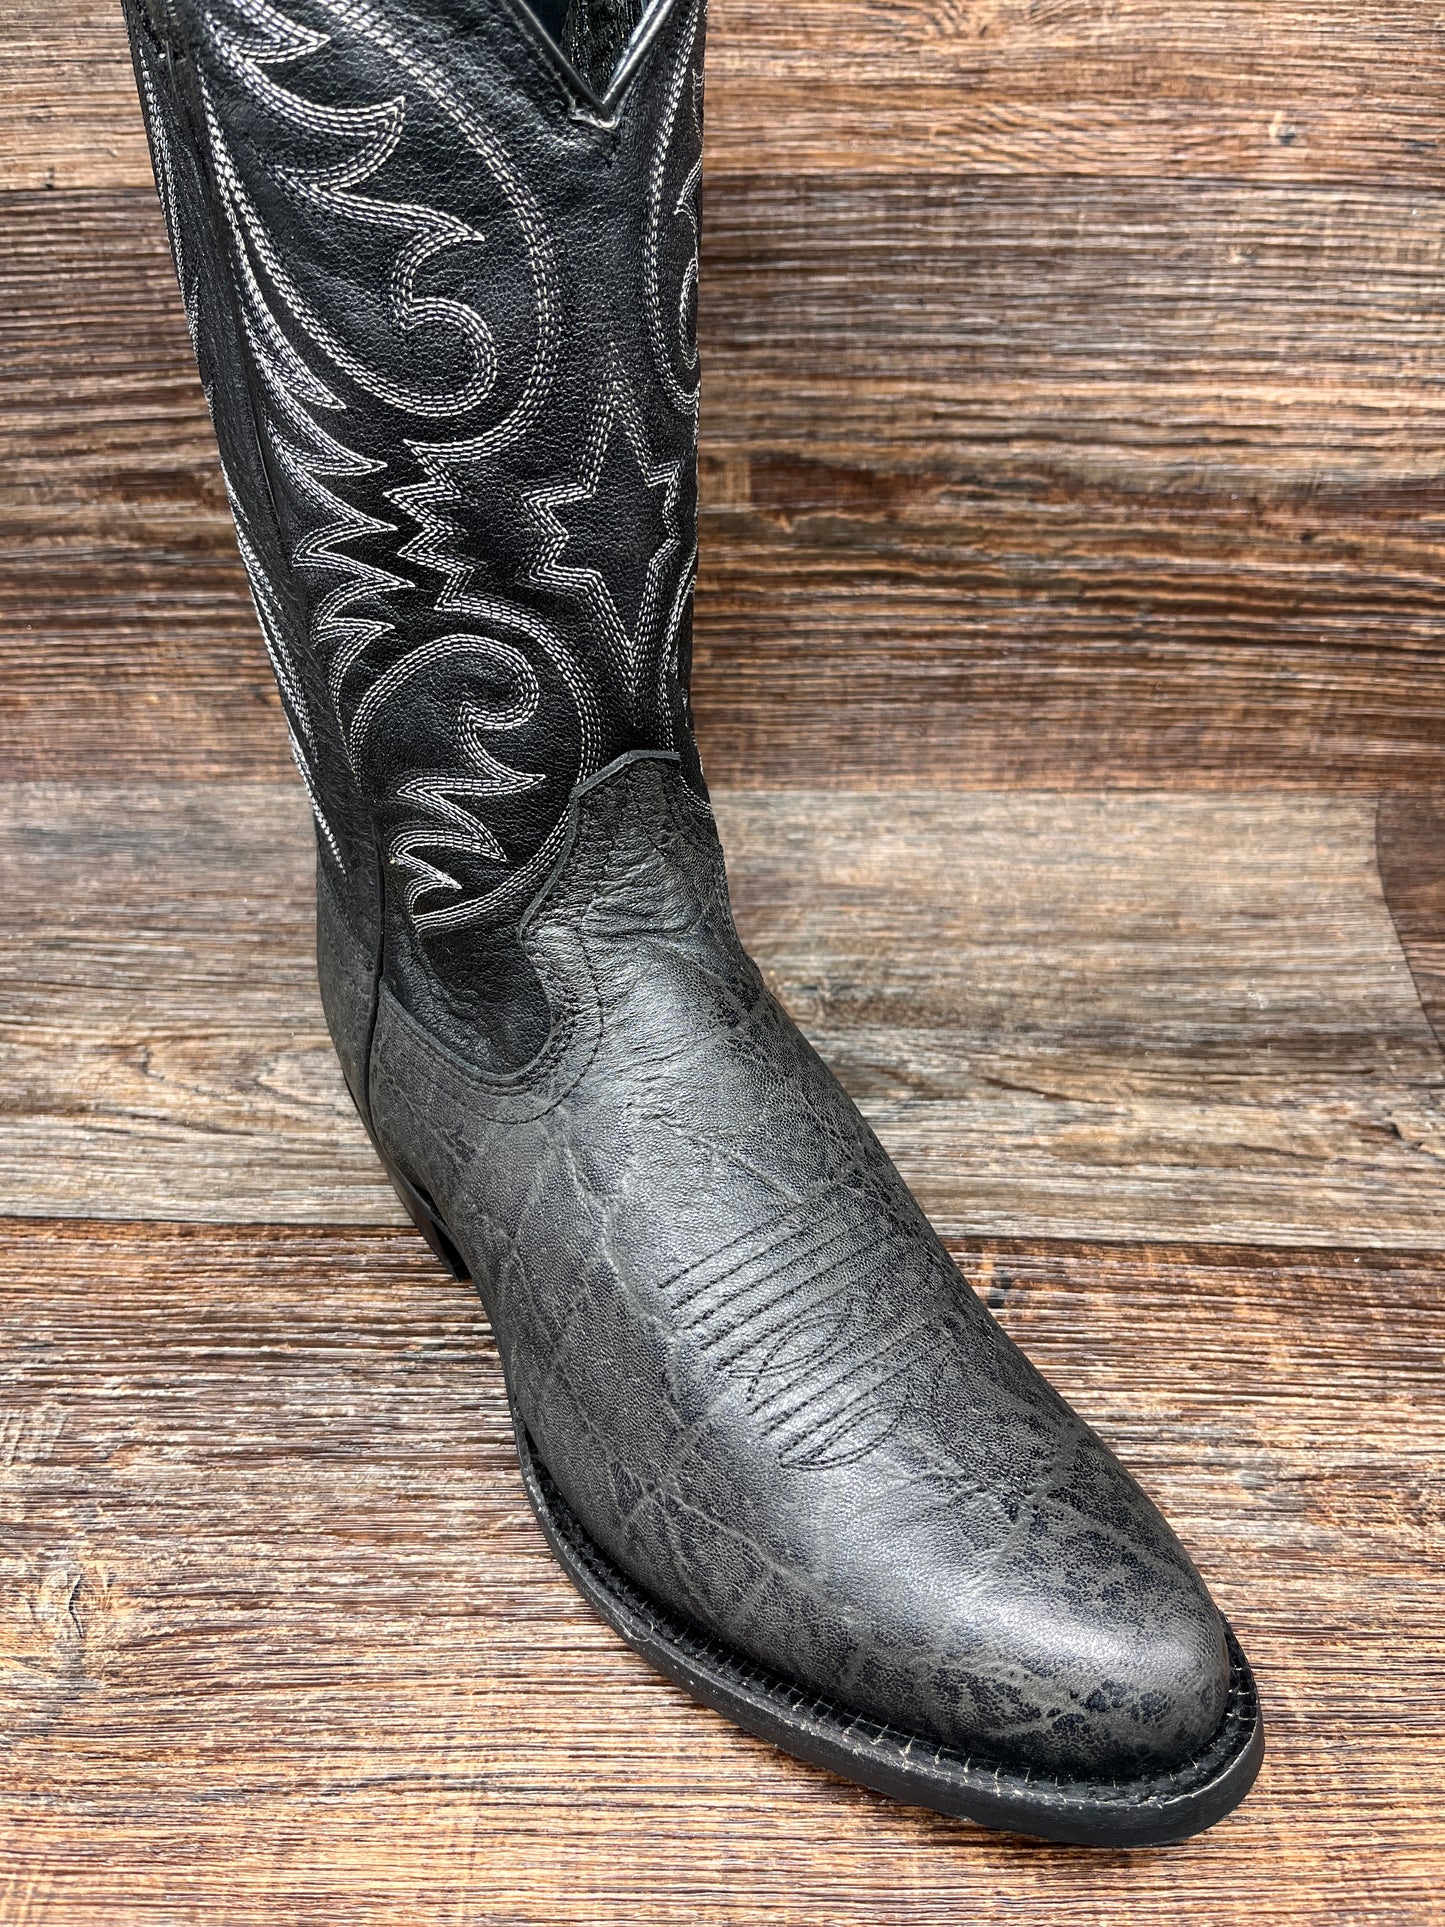 mens-bankroll-round-toe-western-boot-by-ariat Men's Bankroll Round Toe Western Boot in Black by Ariat